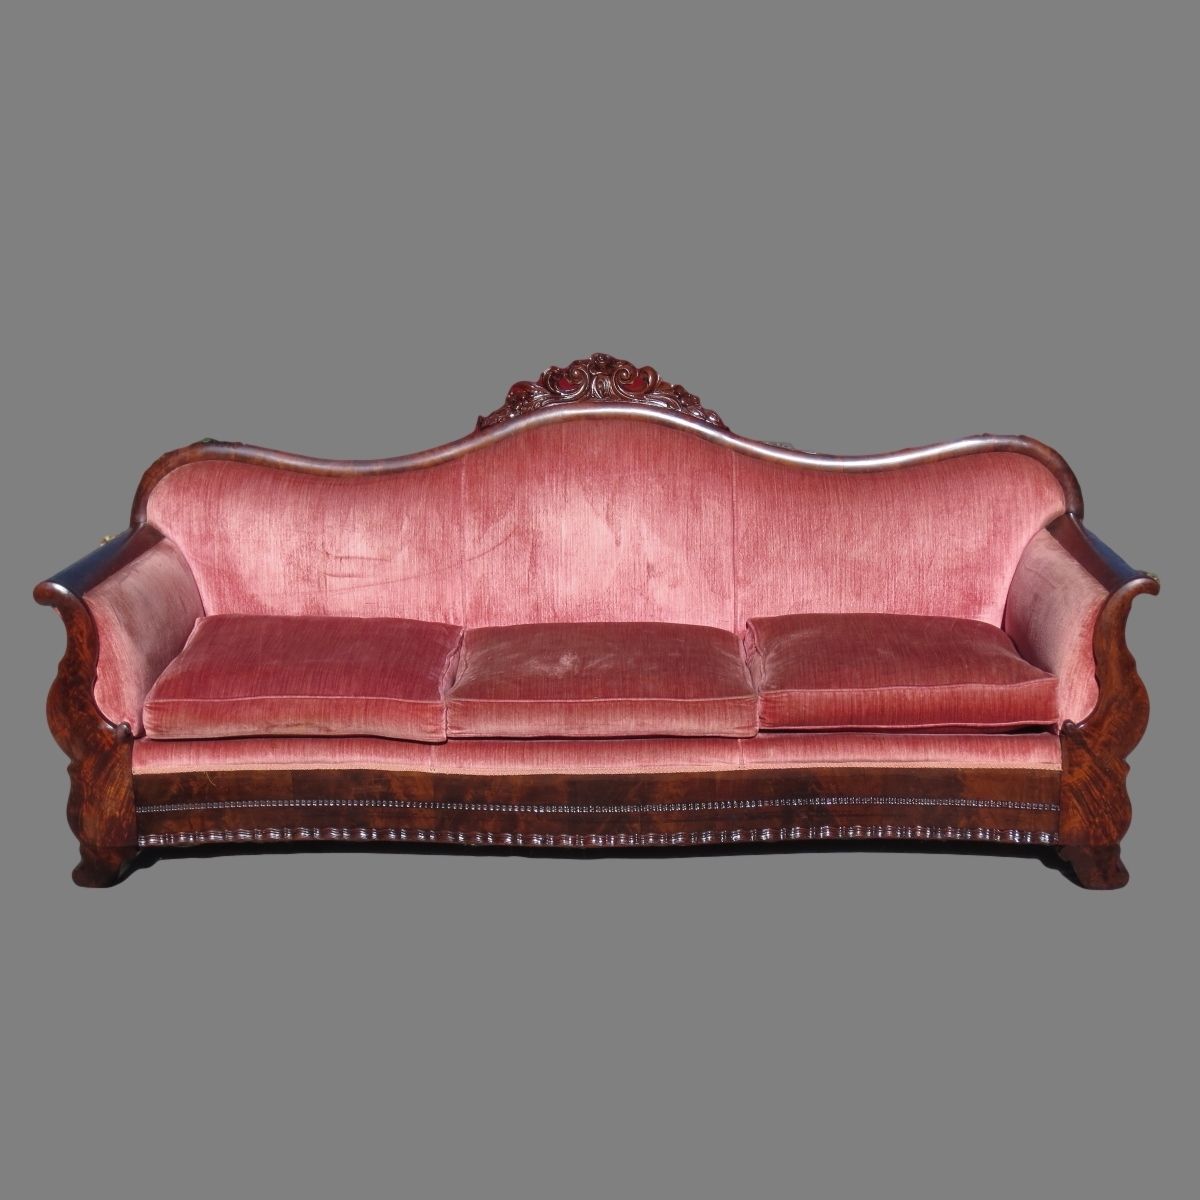 Antique Sofas Intended For Famous Fancy Antique Couch 50 For Your Sofa Room Ideas With Antique Couch (View 16 of 20)